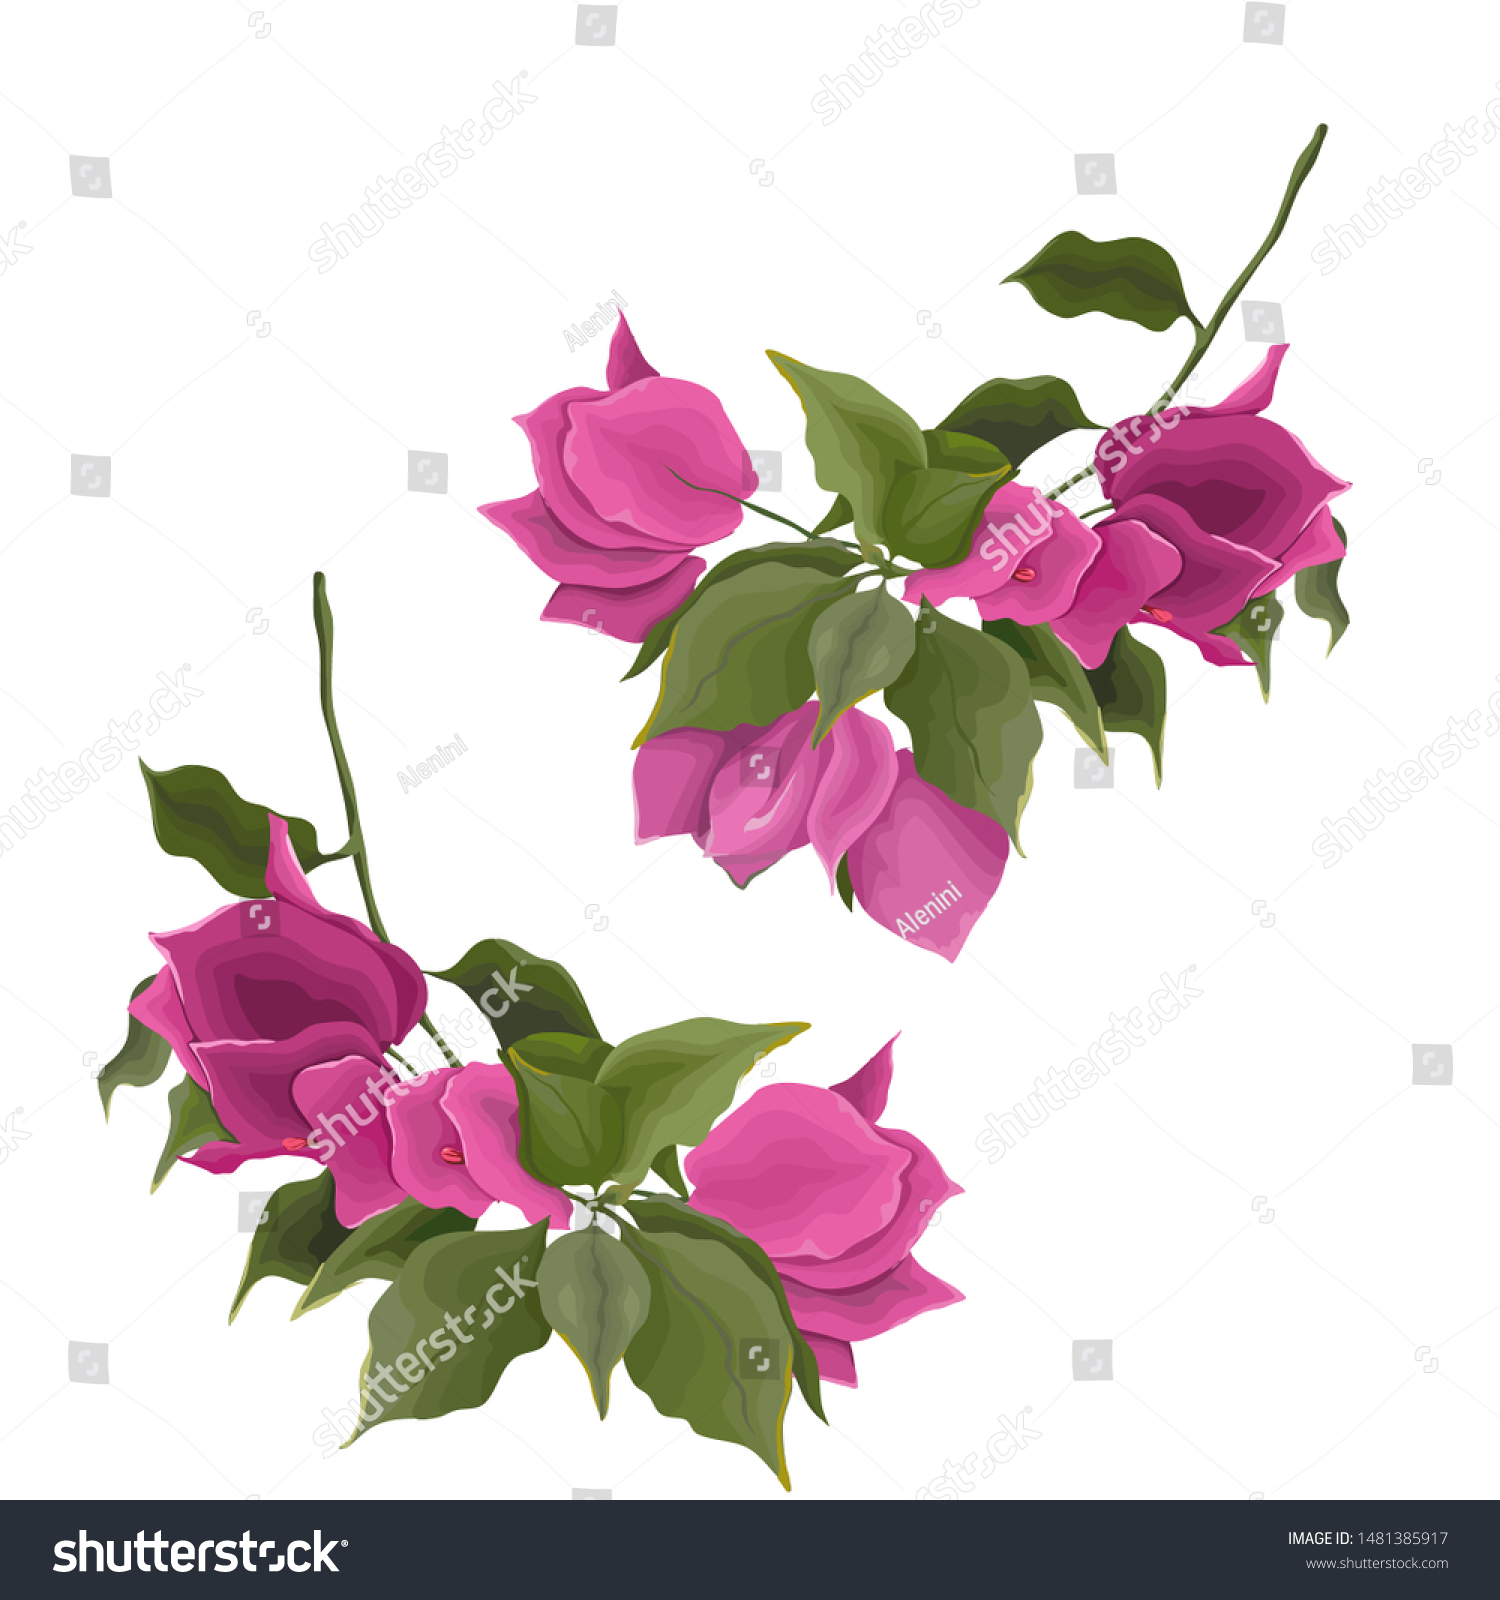 SVG of Bougainvillea flower branches. Flowers on a white background svg